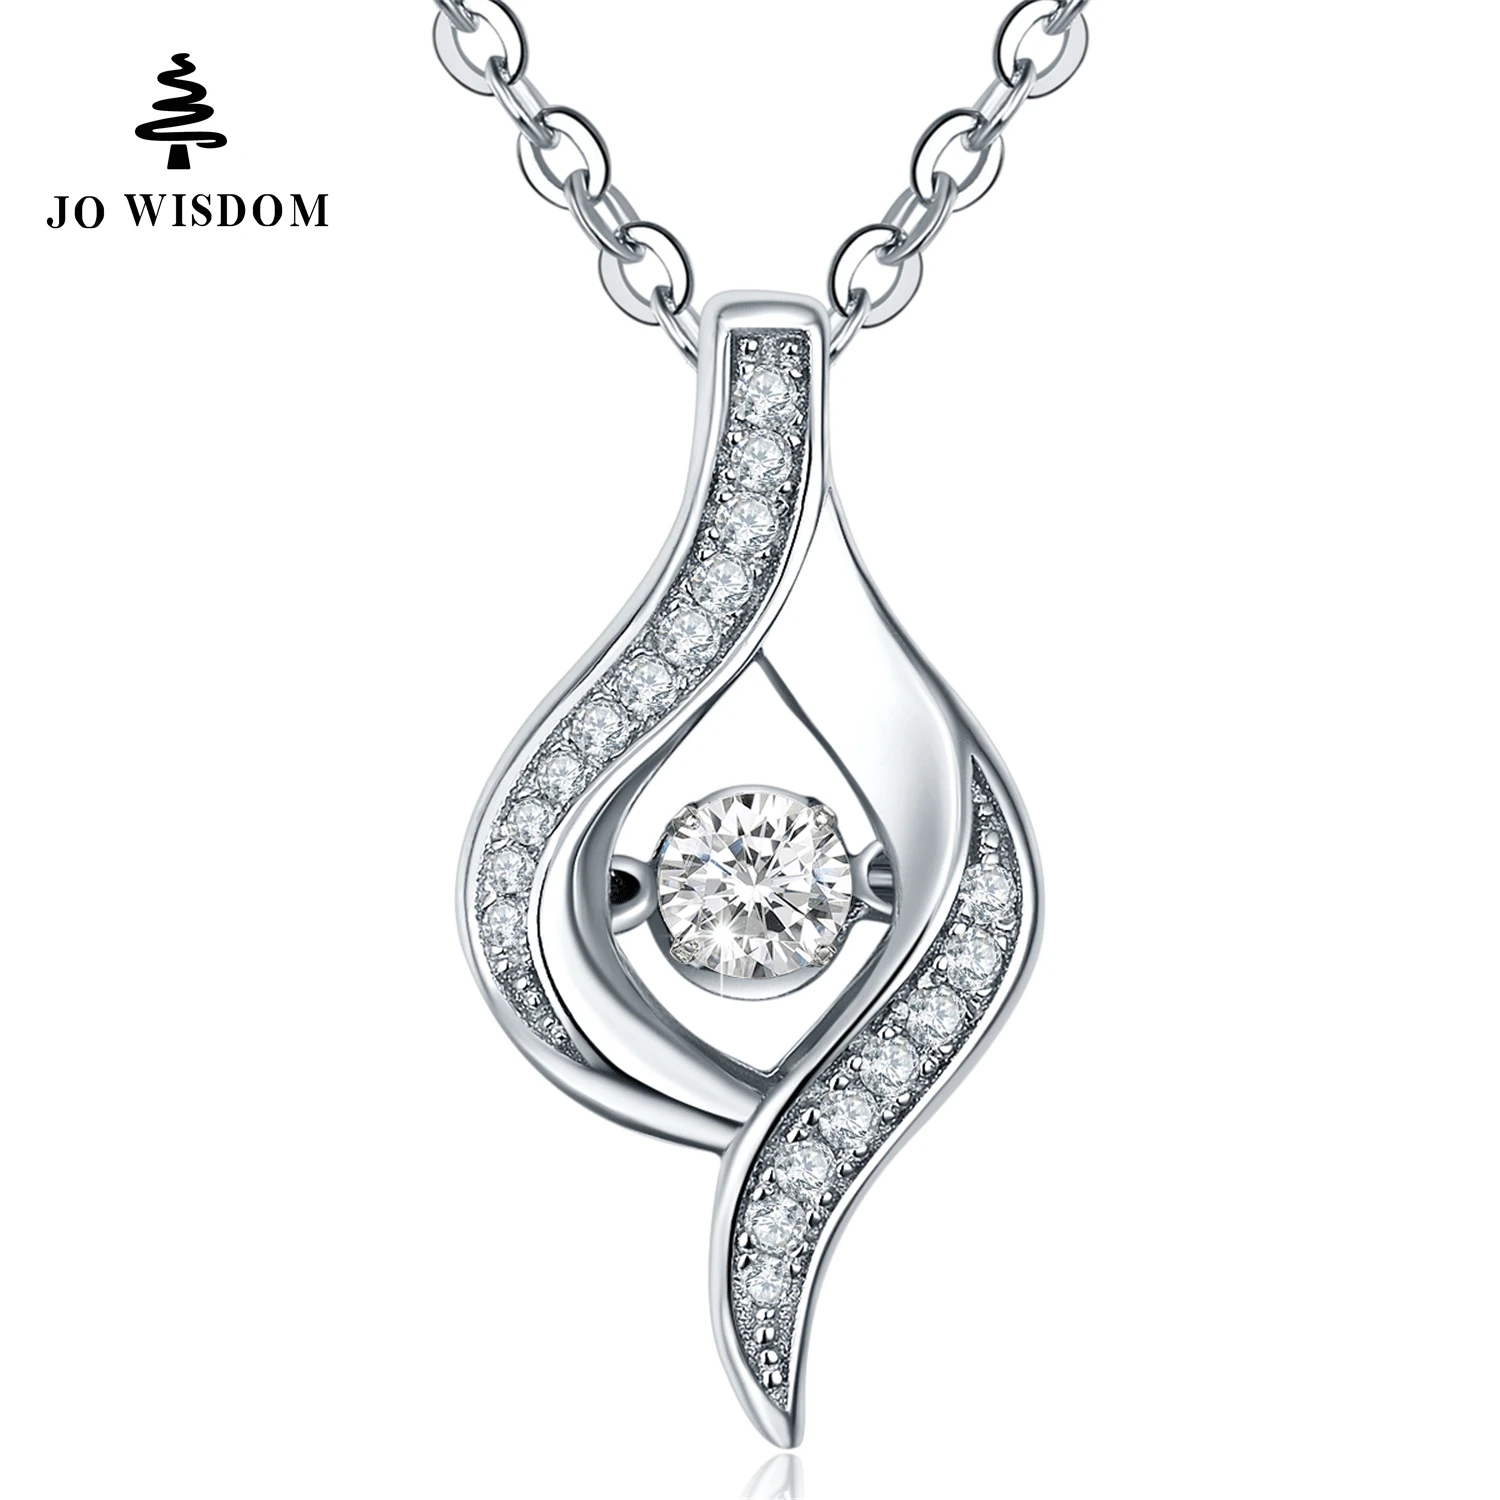 JO WISDOM Hot Sale Silver Necklaces for Women with Natural Topaz Dancing Stone Colar Kolye ...